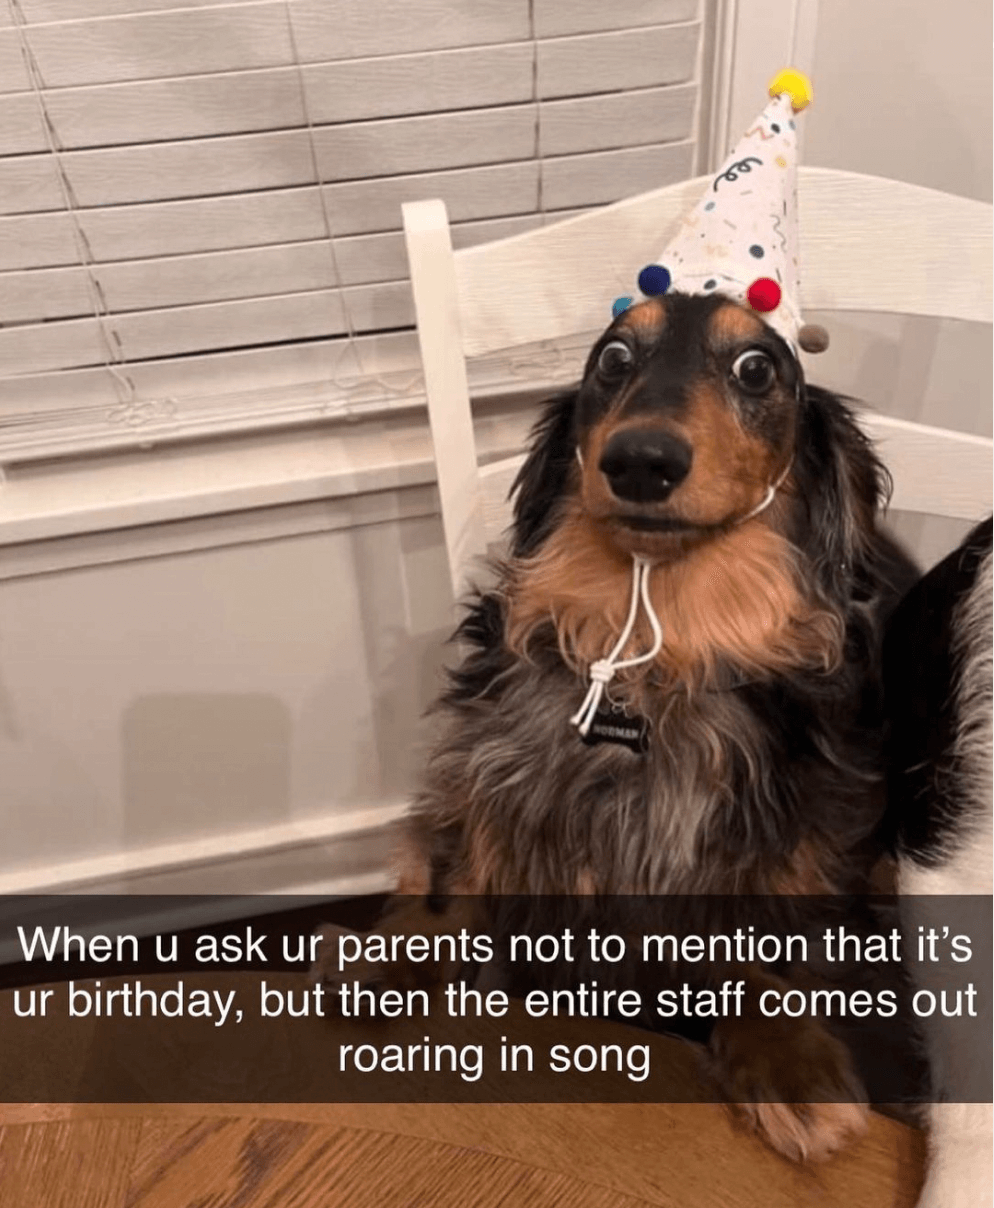 Social image showing an alarmed dog wearing a party hat, captioned "When u ask ur parents not to mention that it's ur birthday, but then the entire staff comes out roaring in song"